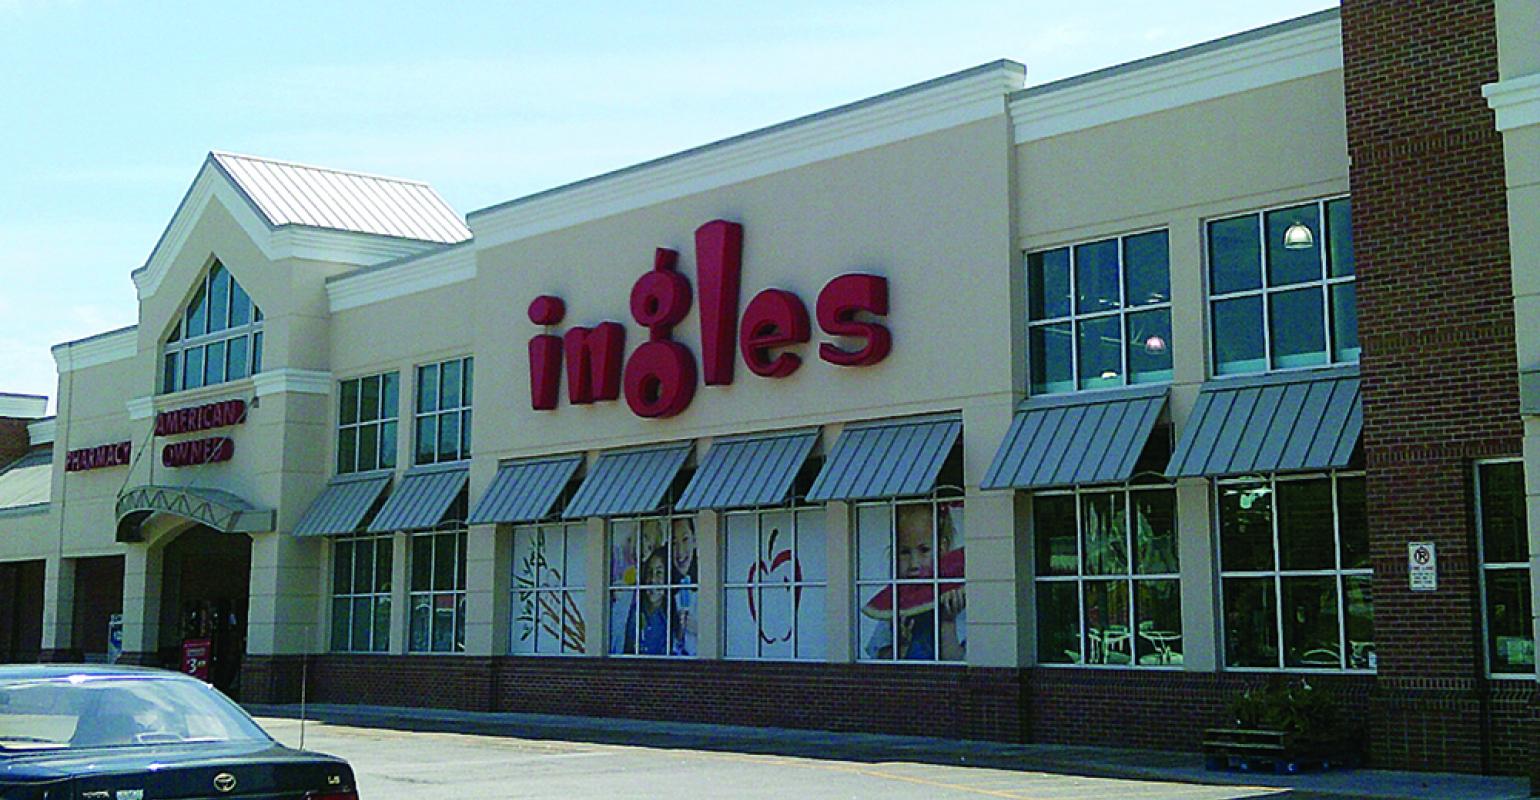 Ingles Markets - Introducing our newest Ingles Curbside